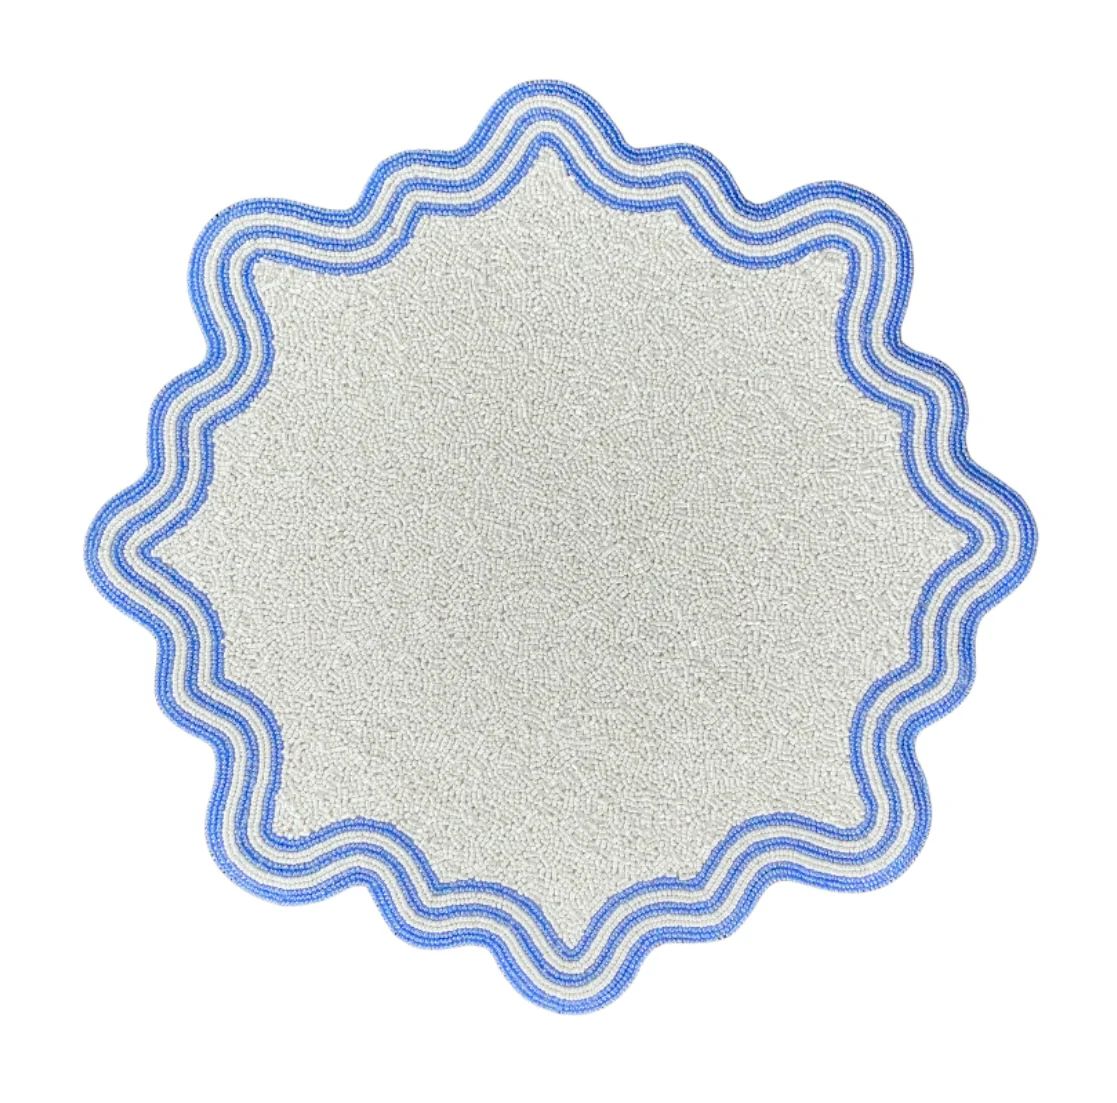 Periwinkle and White Hand Beaded Placemat | Beth Ladd Collections